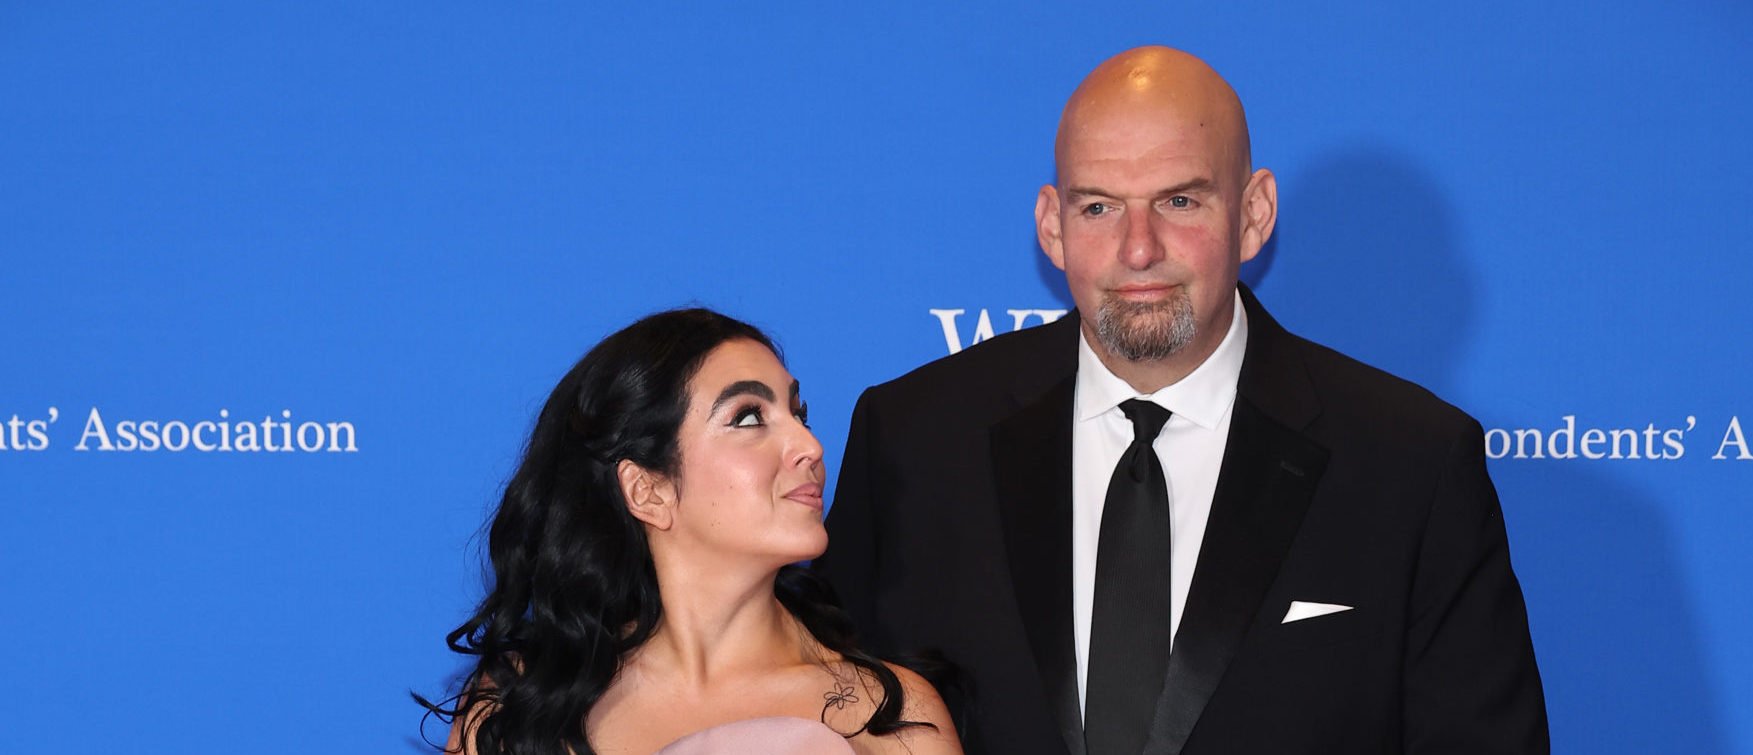 John Fettermans Wife Lays Out The Future Liberals Want — And Its The Worst Thing Youve Ever Seen The Daily Caller picture